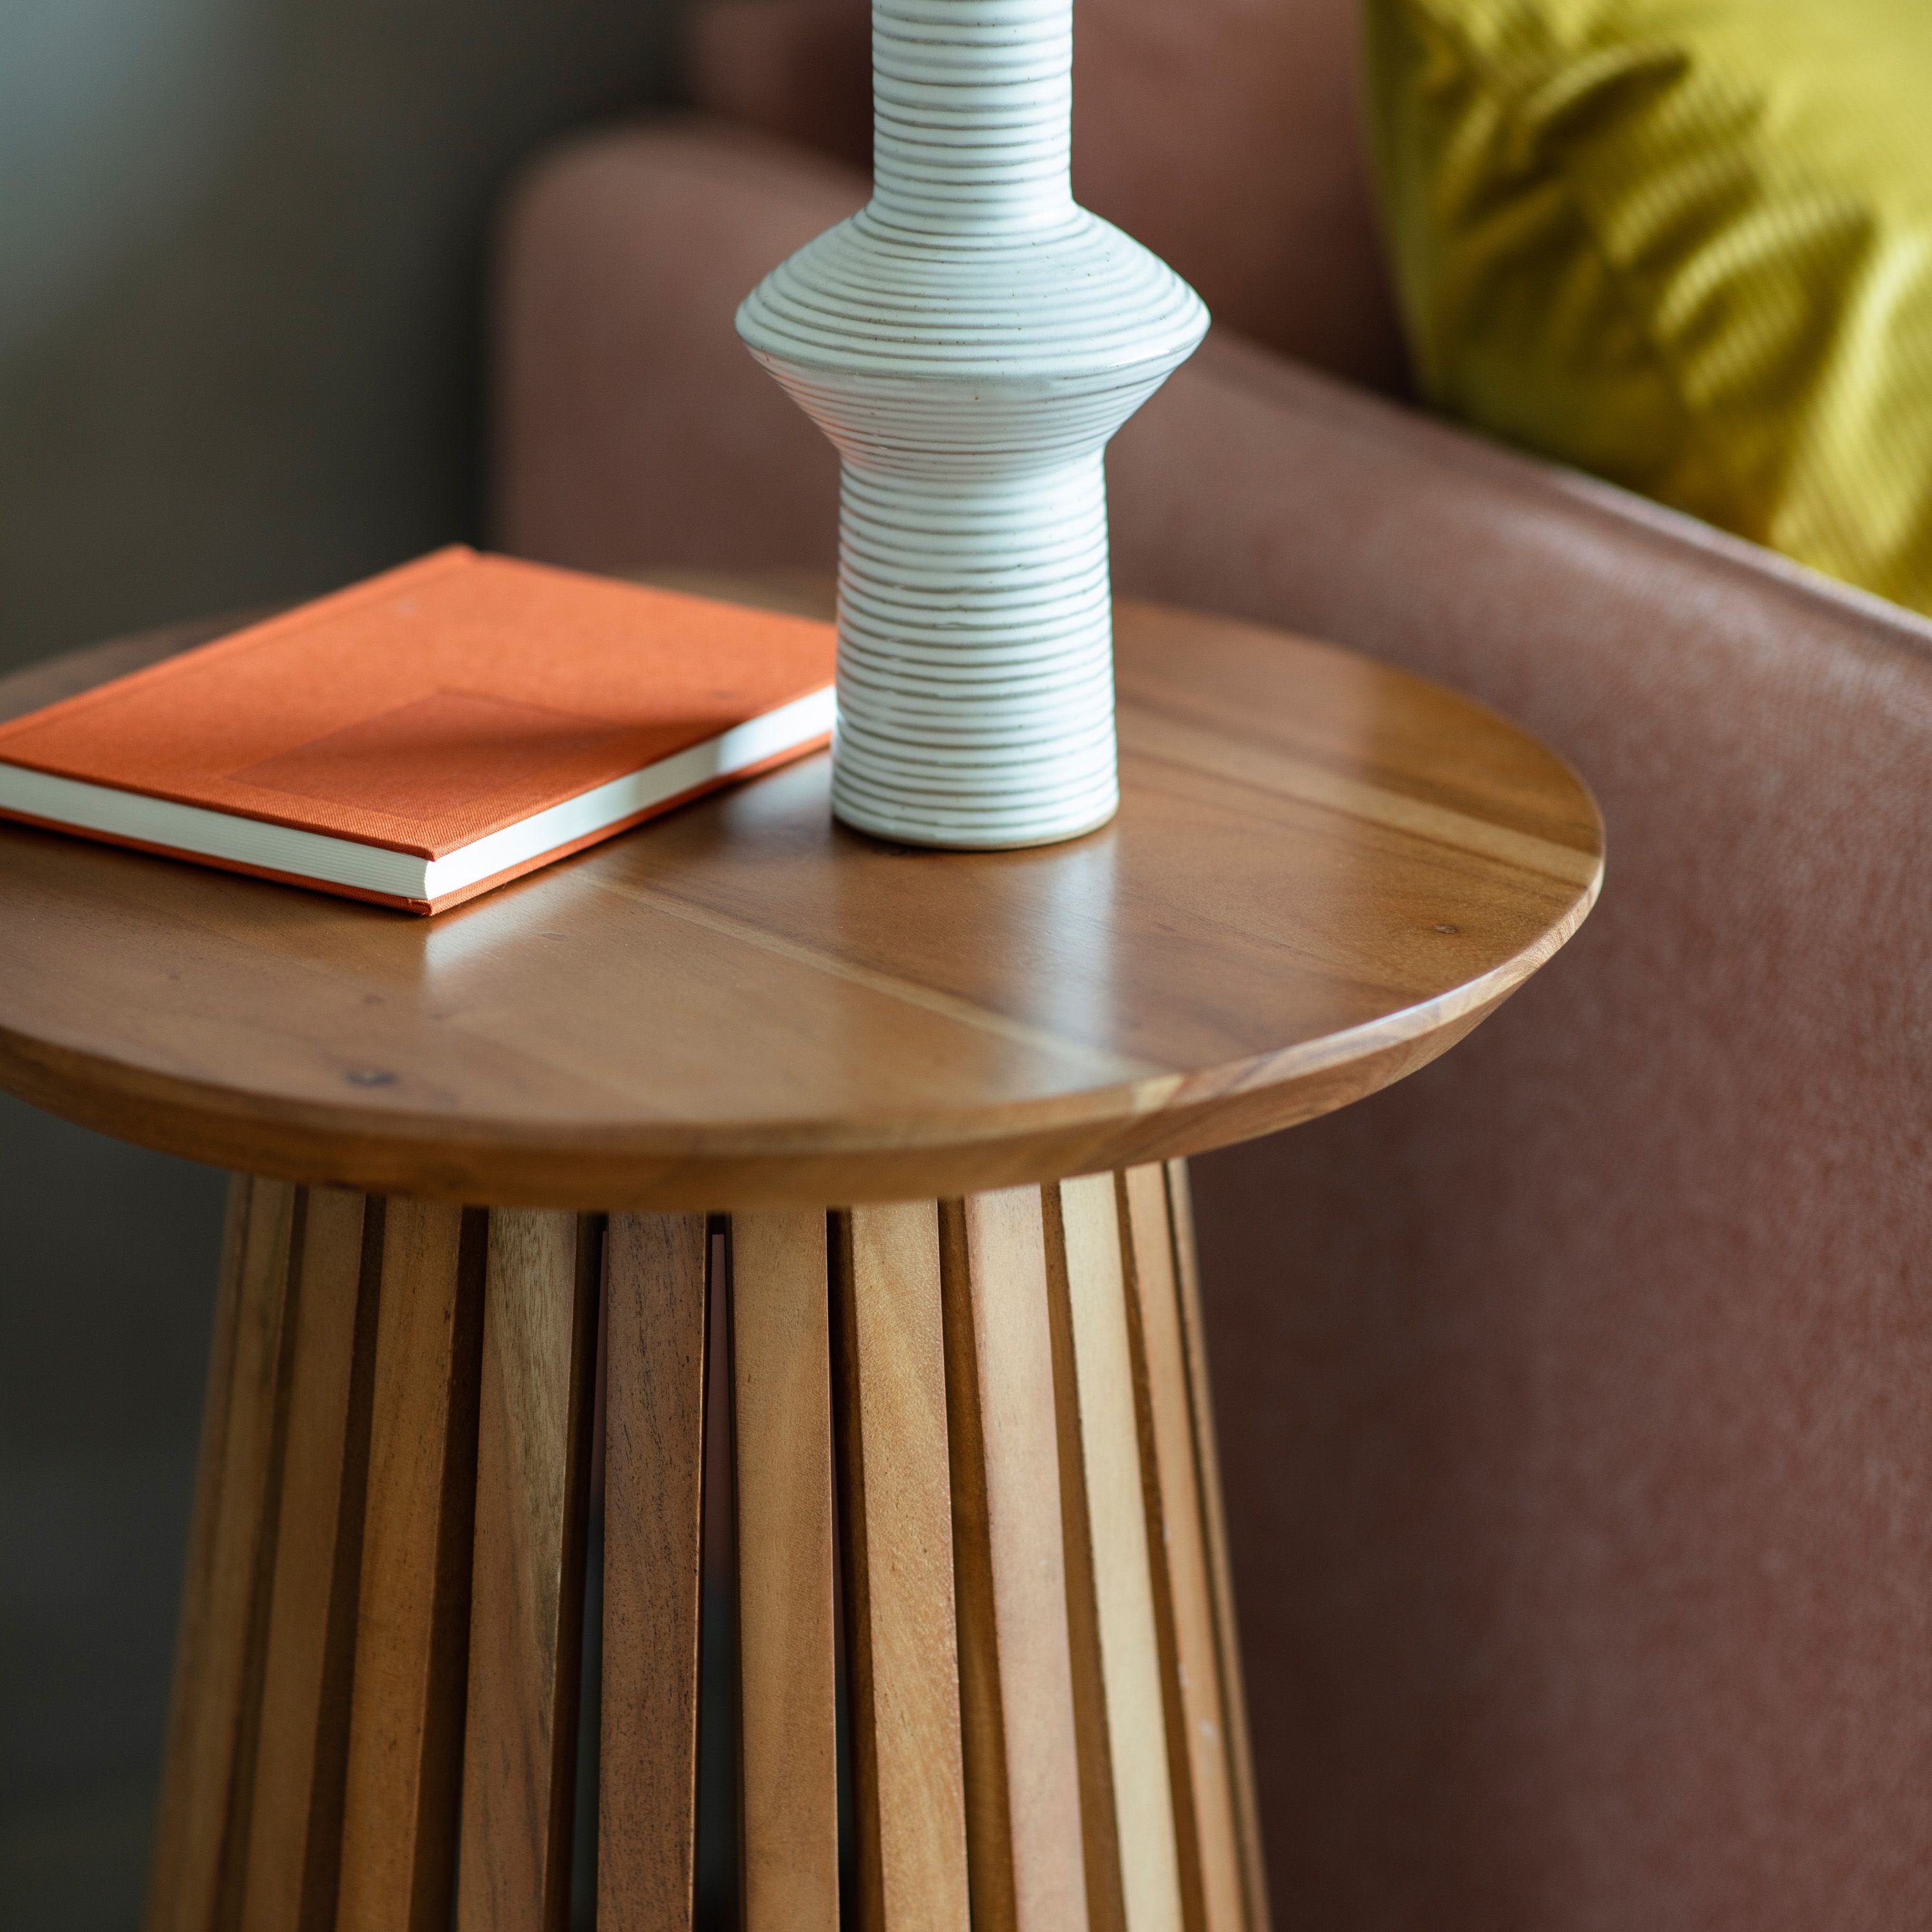 Aiken Side Table - Cool and Unique Side Tables